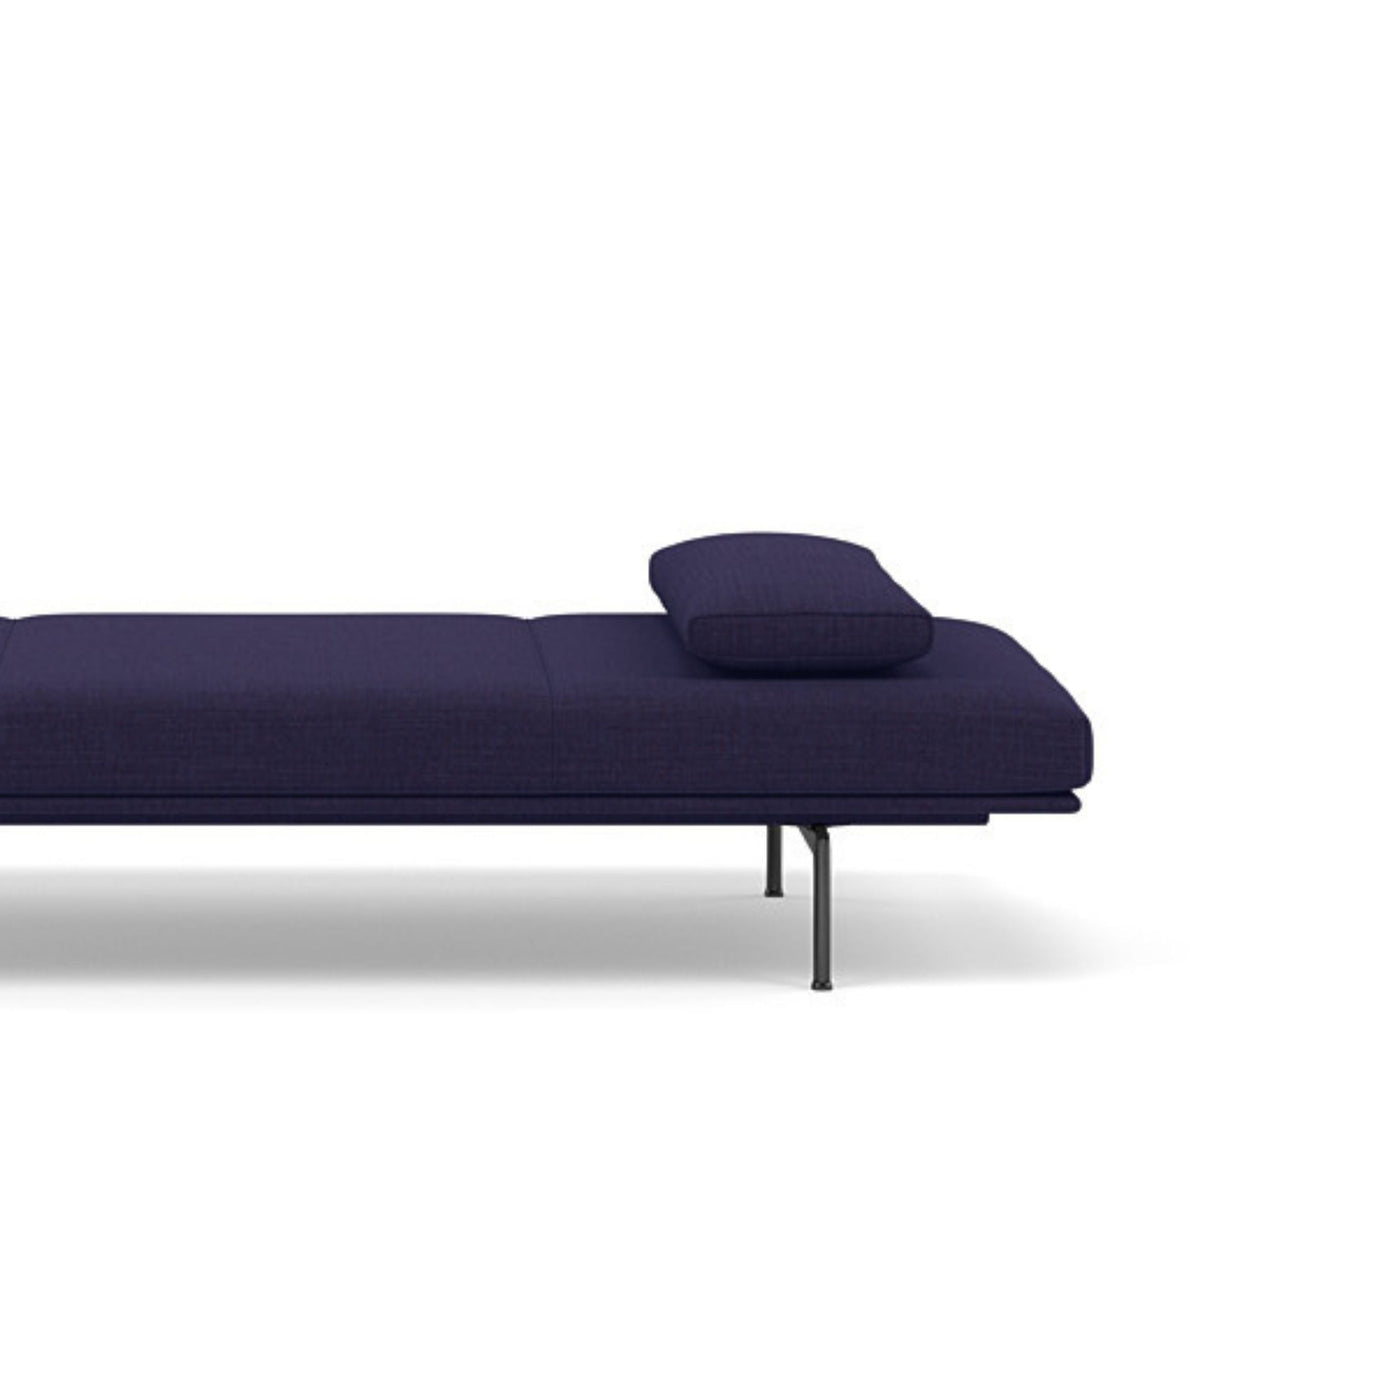 Muuto Outline Daybed Cushion, 70x30cm in canvas 684. Shop online at someday designs. #colour_canvas-684-blue